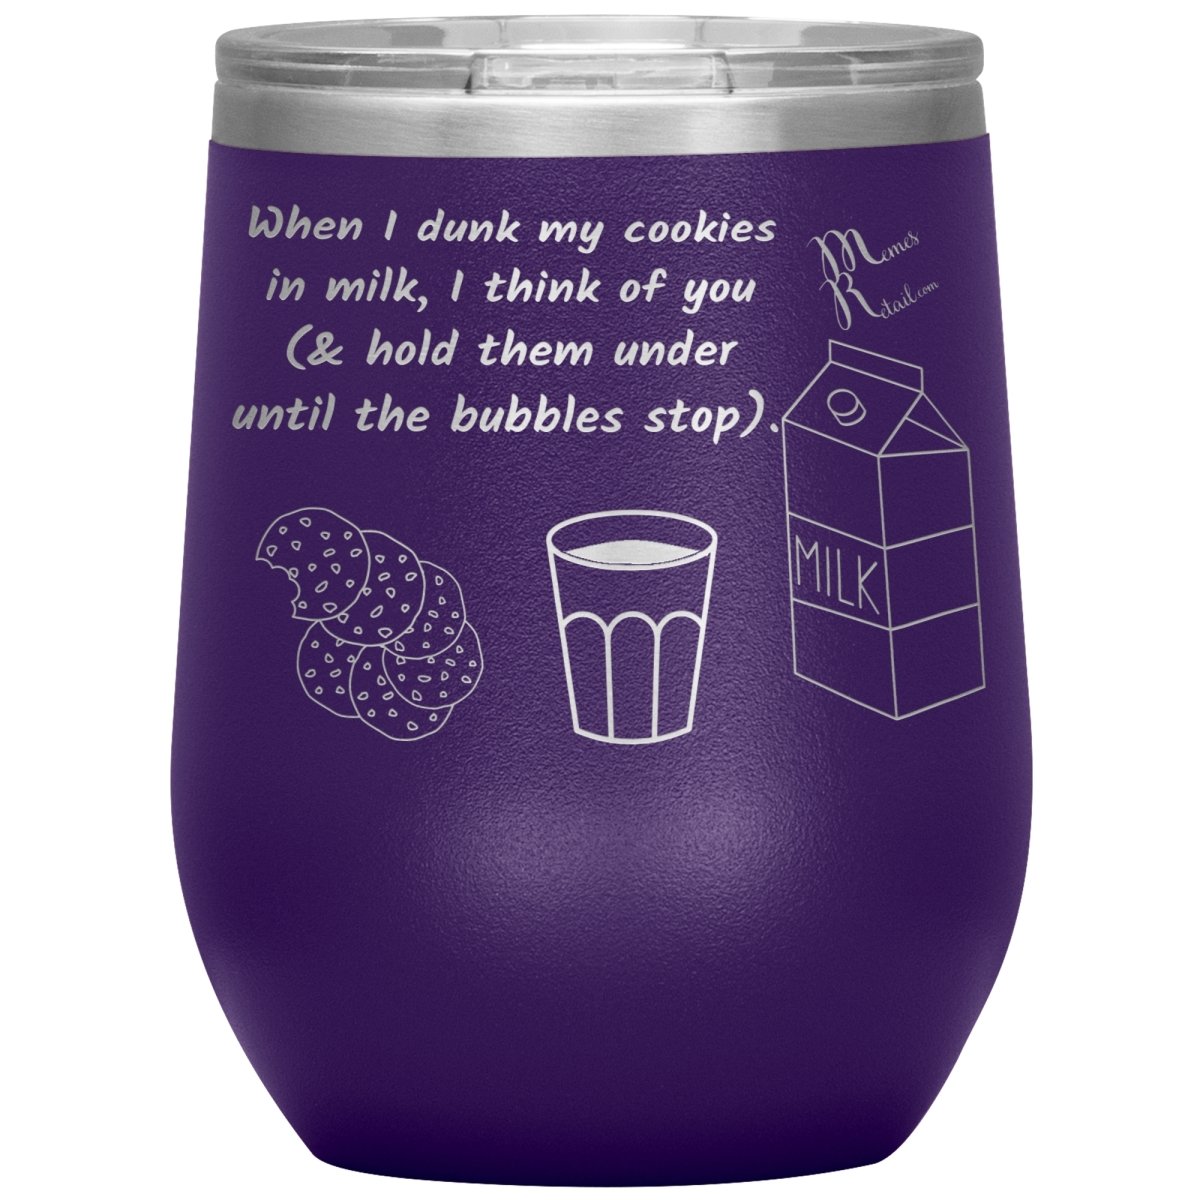 When I dunk My Cookies in Milk, I think of You - Tumblers, 12oz Wine Insulated Tumbler / Purple - MemesRetail.com